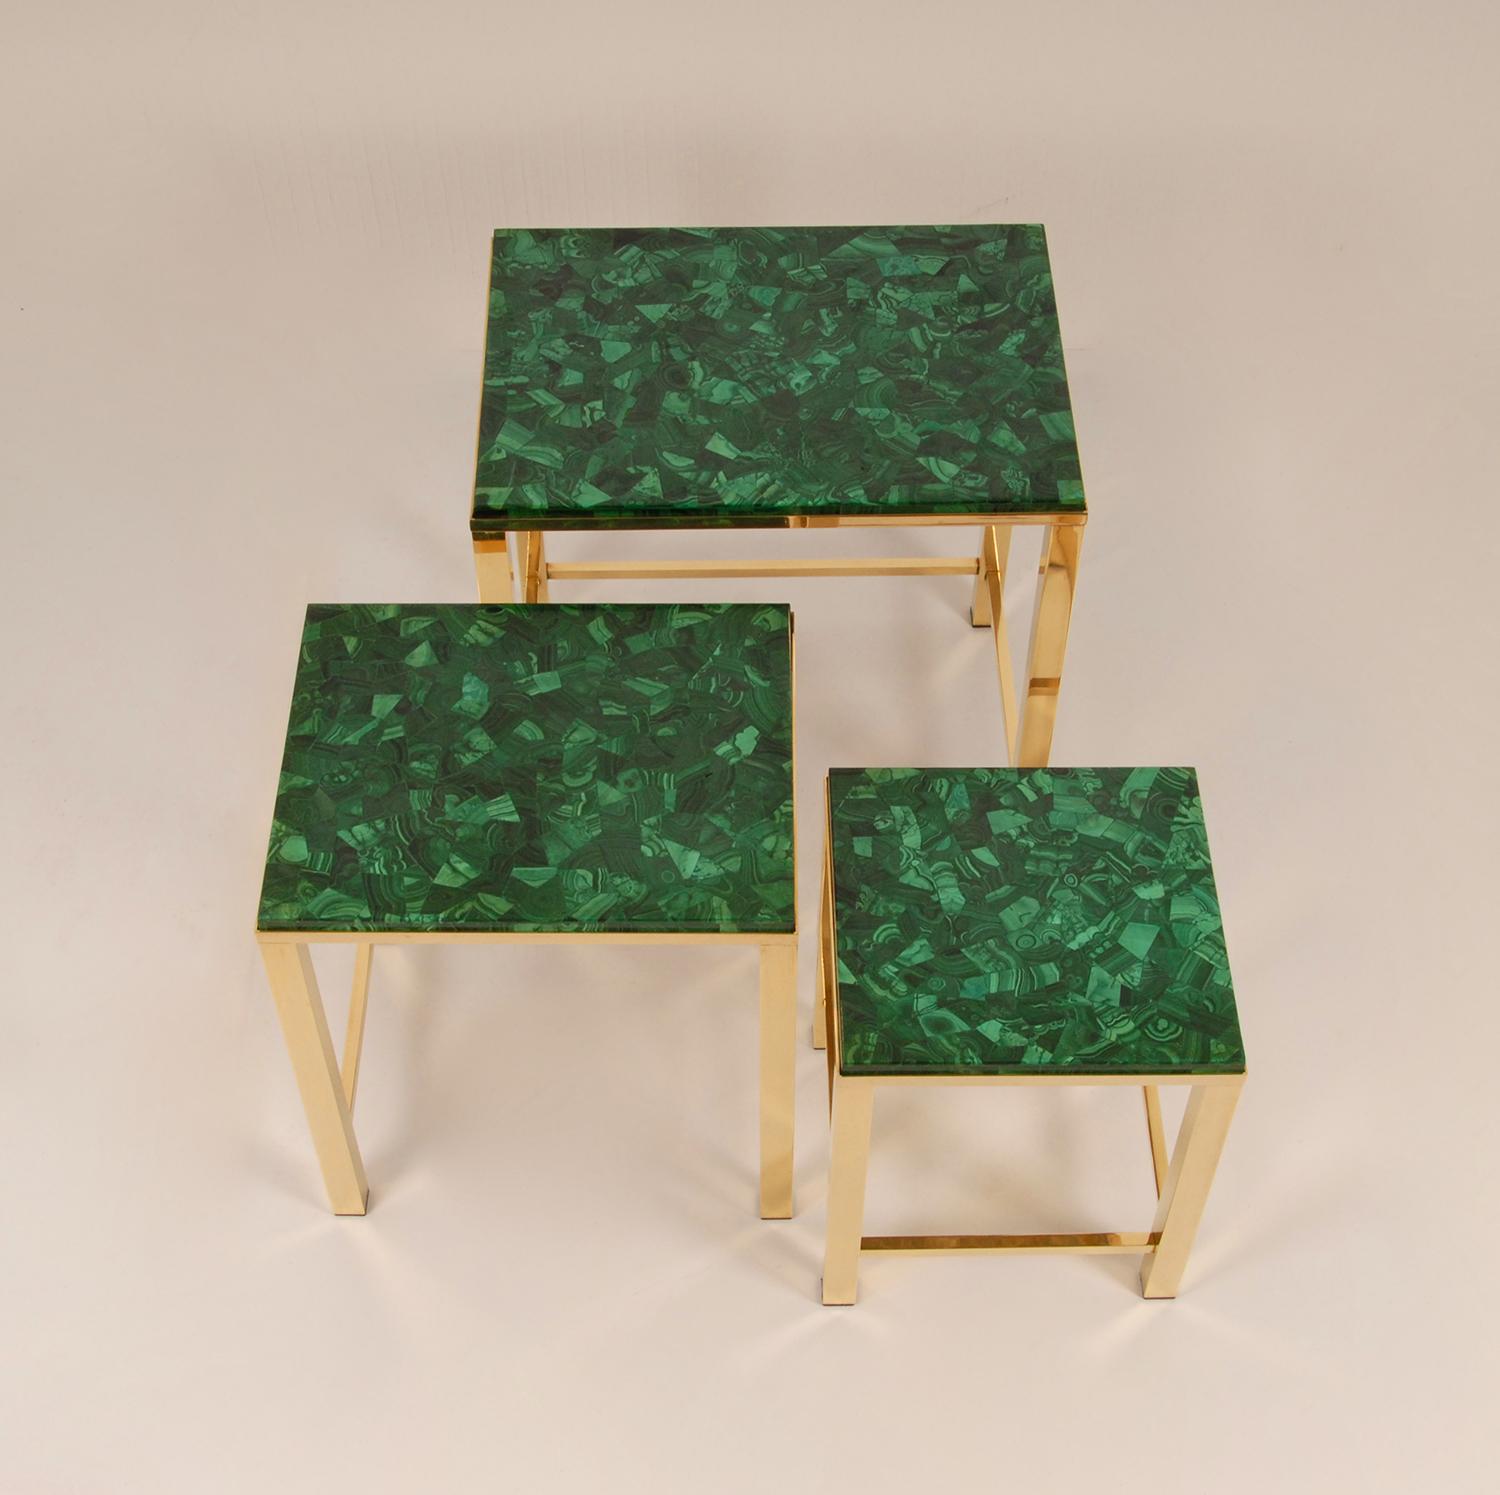 Vintage Malachite Marble Green Gold Gilded Brass End Nest Tables Coffee Table  In Good Condition For Sale In Wommelgem, VAN